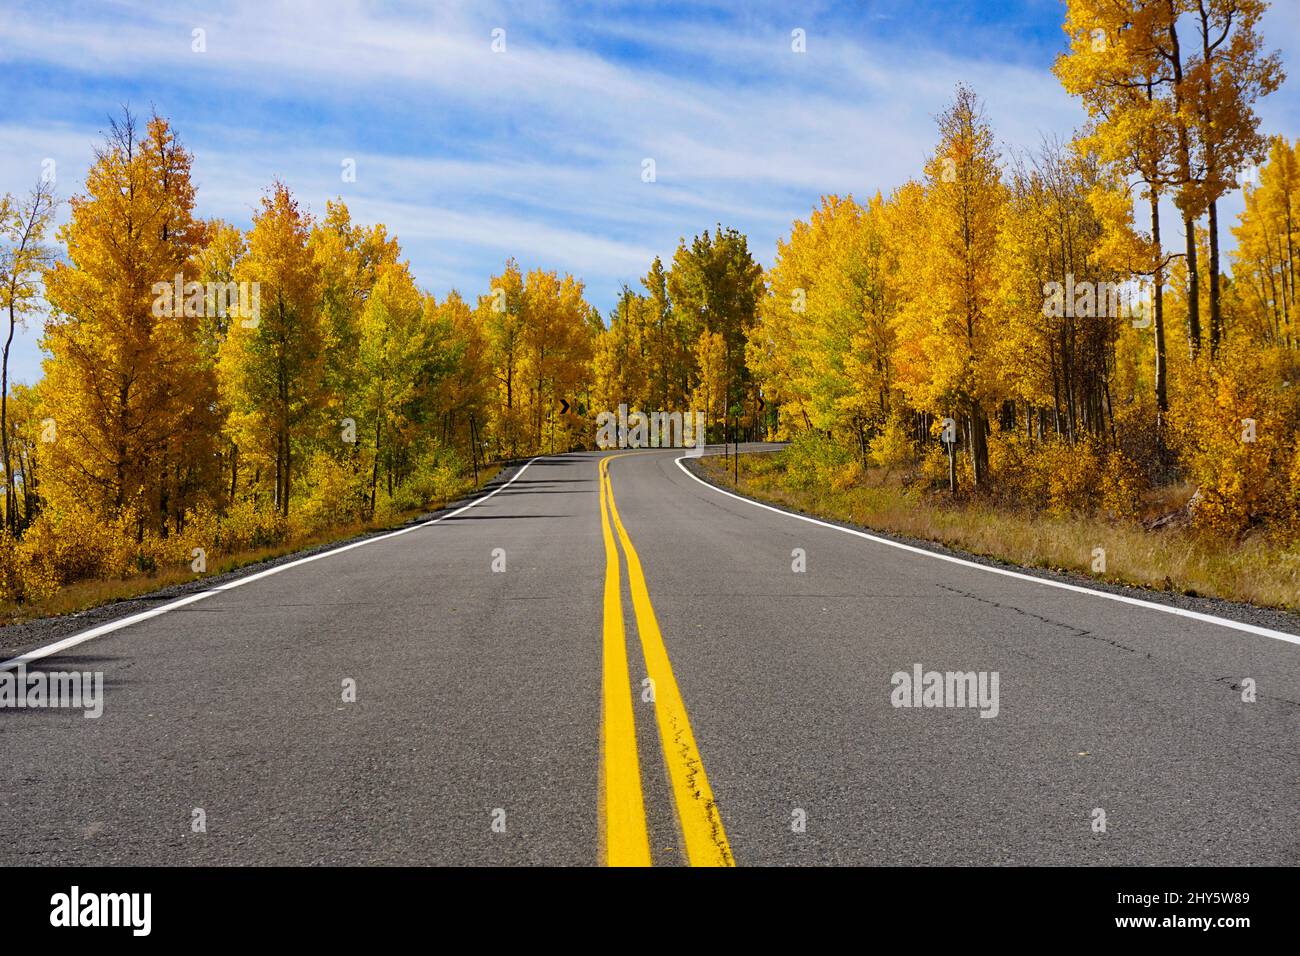 A two-lane paved road lined with trees displaying their fall foliage. Along Highway 149 in Colorado. Stock Photo